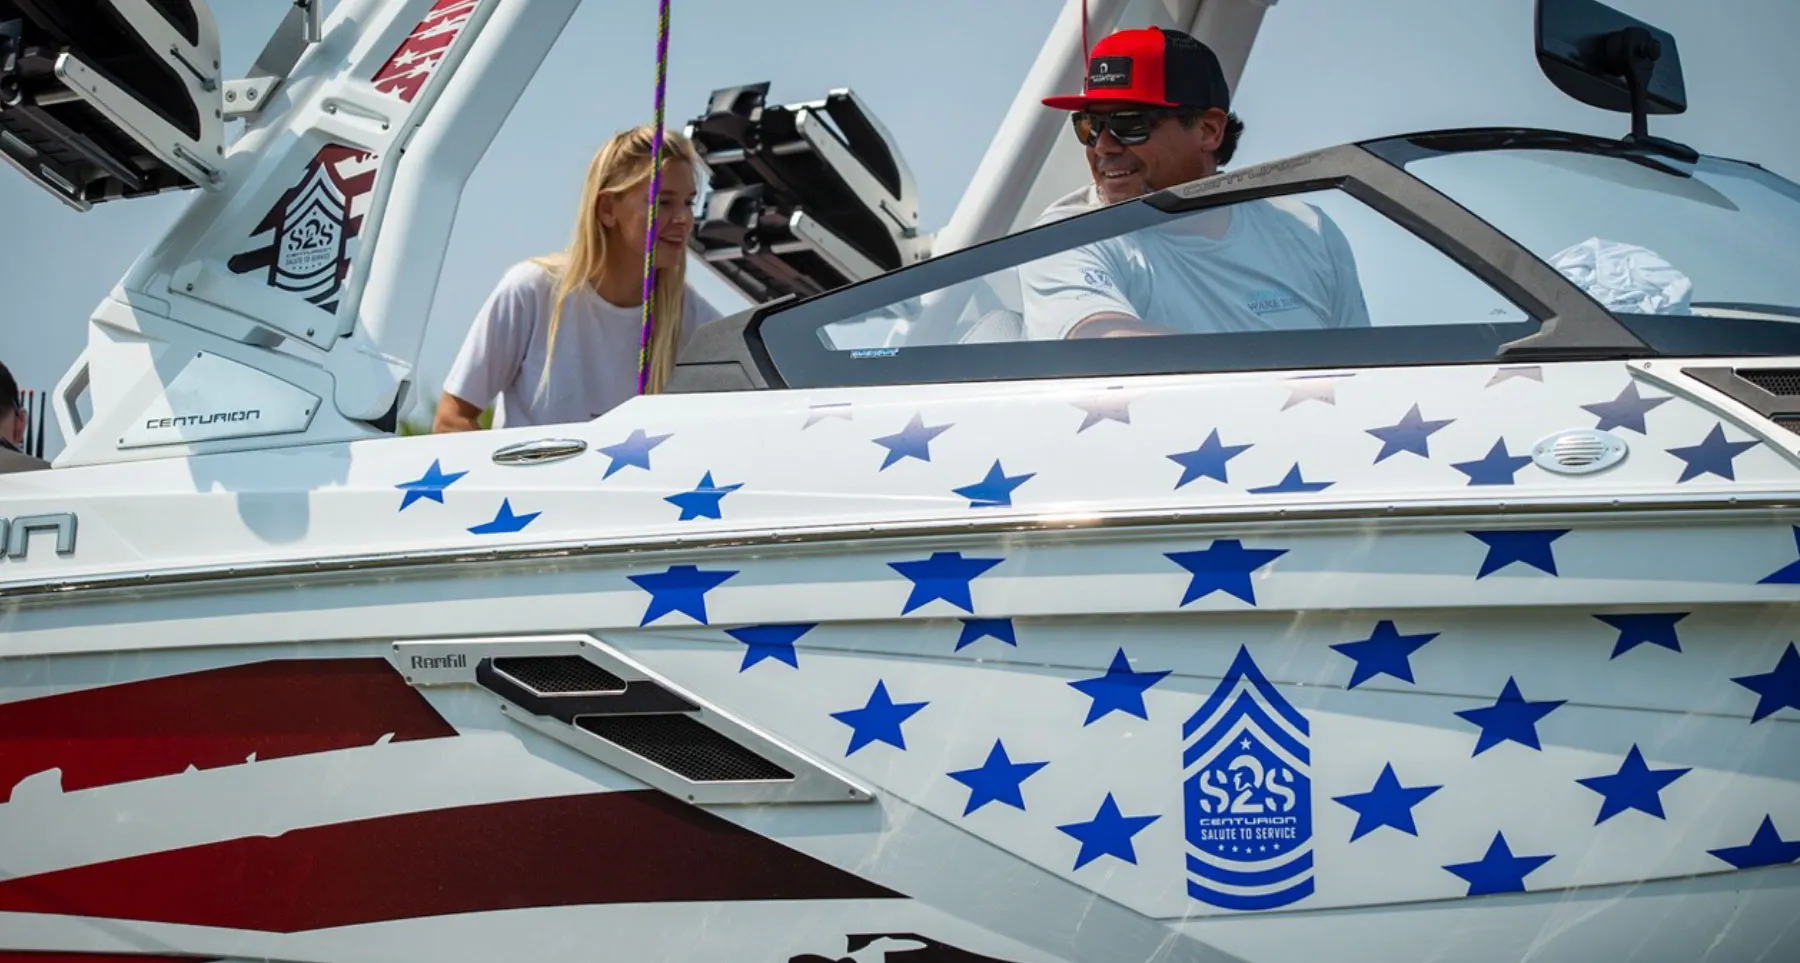 A man and woman on a wakesurf boat with an American flag on it.